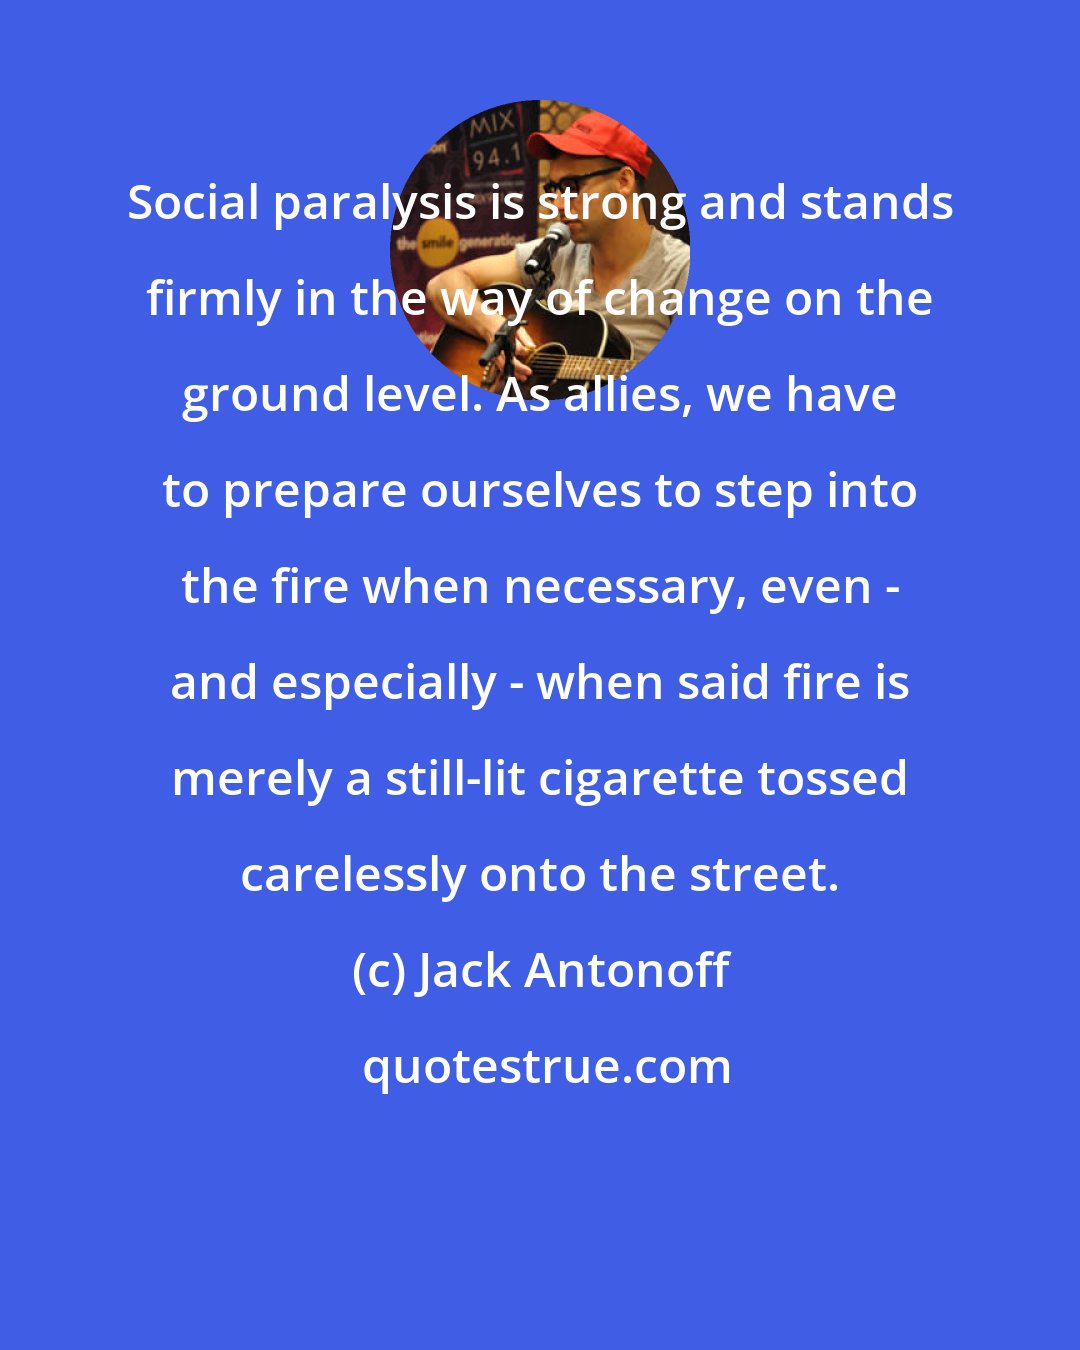 Jack Antonoff: Social paralysis is strong and stands firmly in the way of change on the ground level. As allies, we have to prepare ourselves to step into the fire when necessary, even - and especially - when said fire is merely a still-lit cigarette tossed carelessly onto the street.